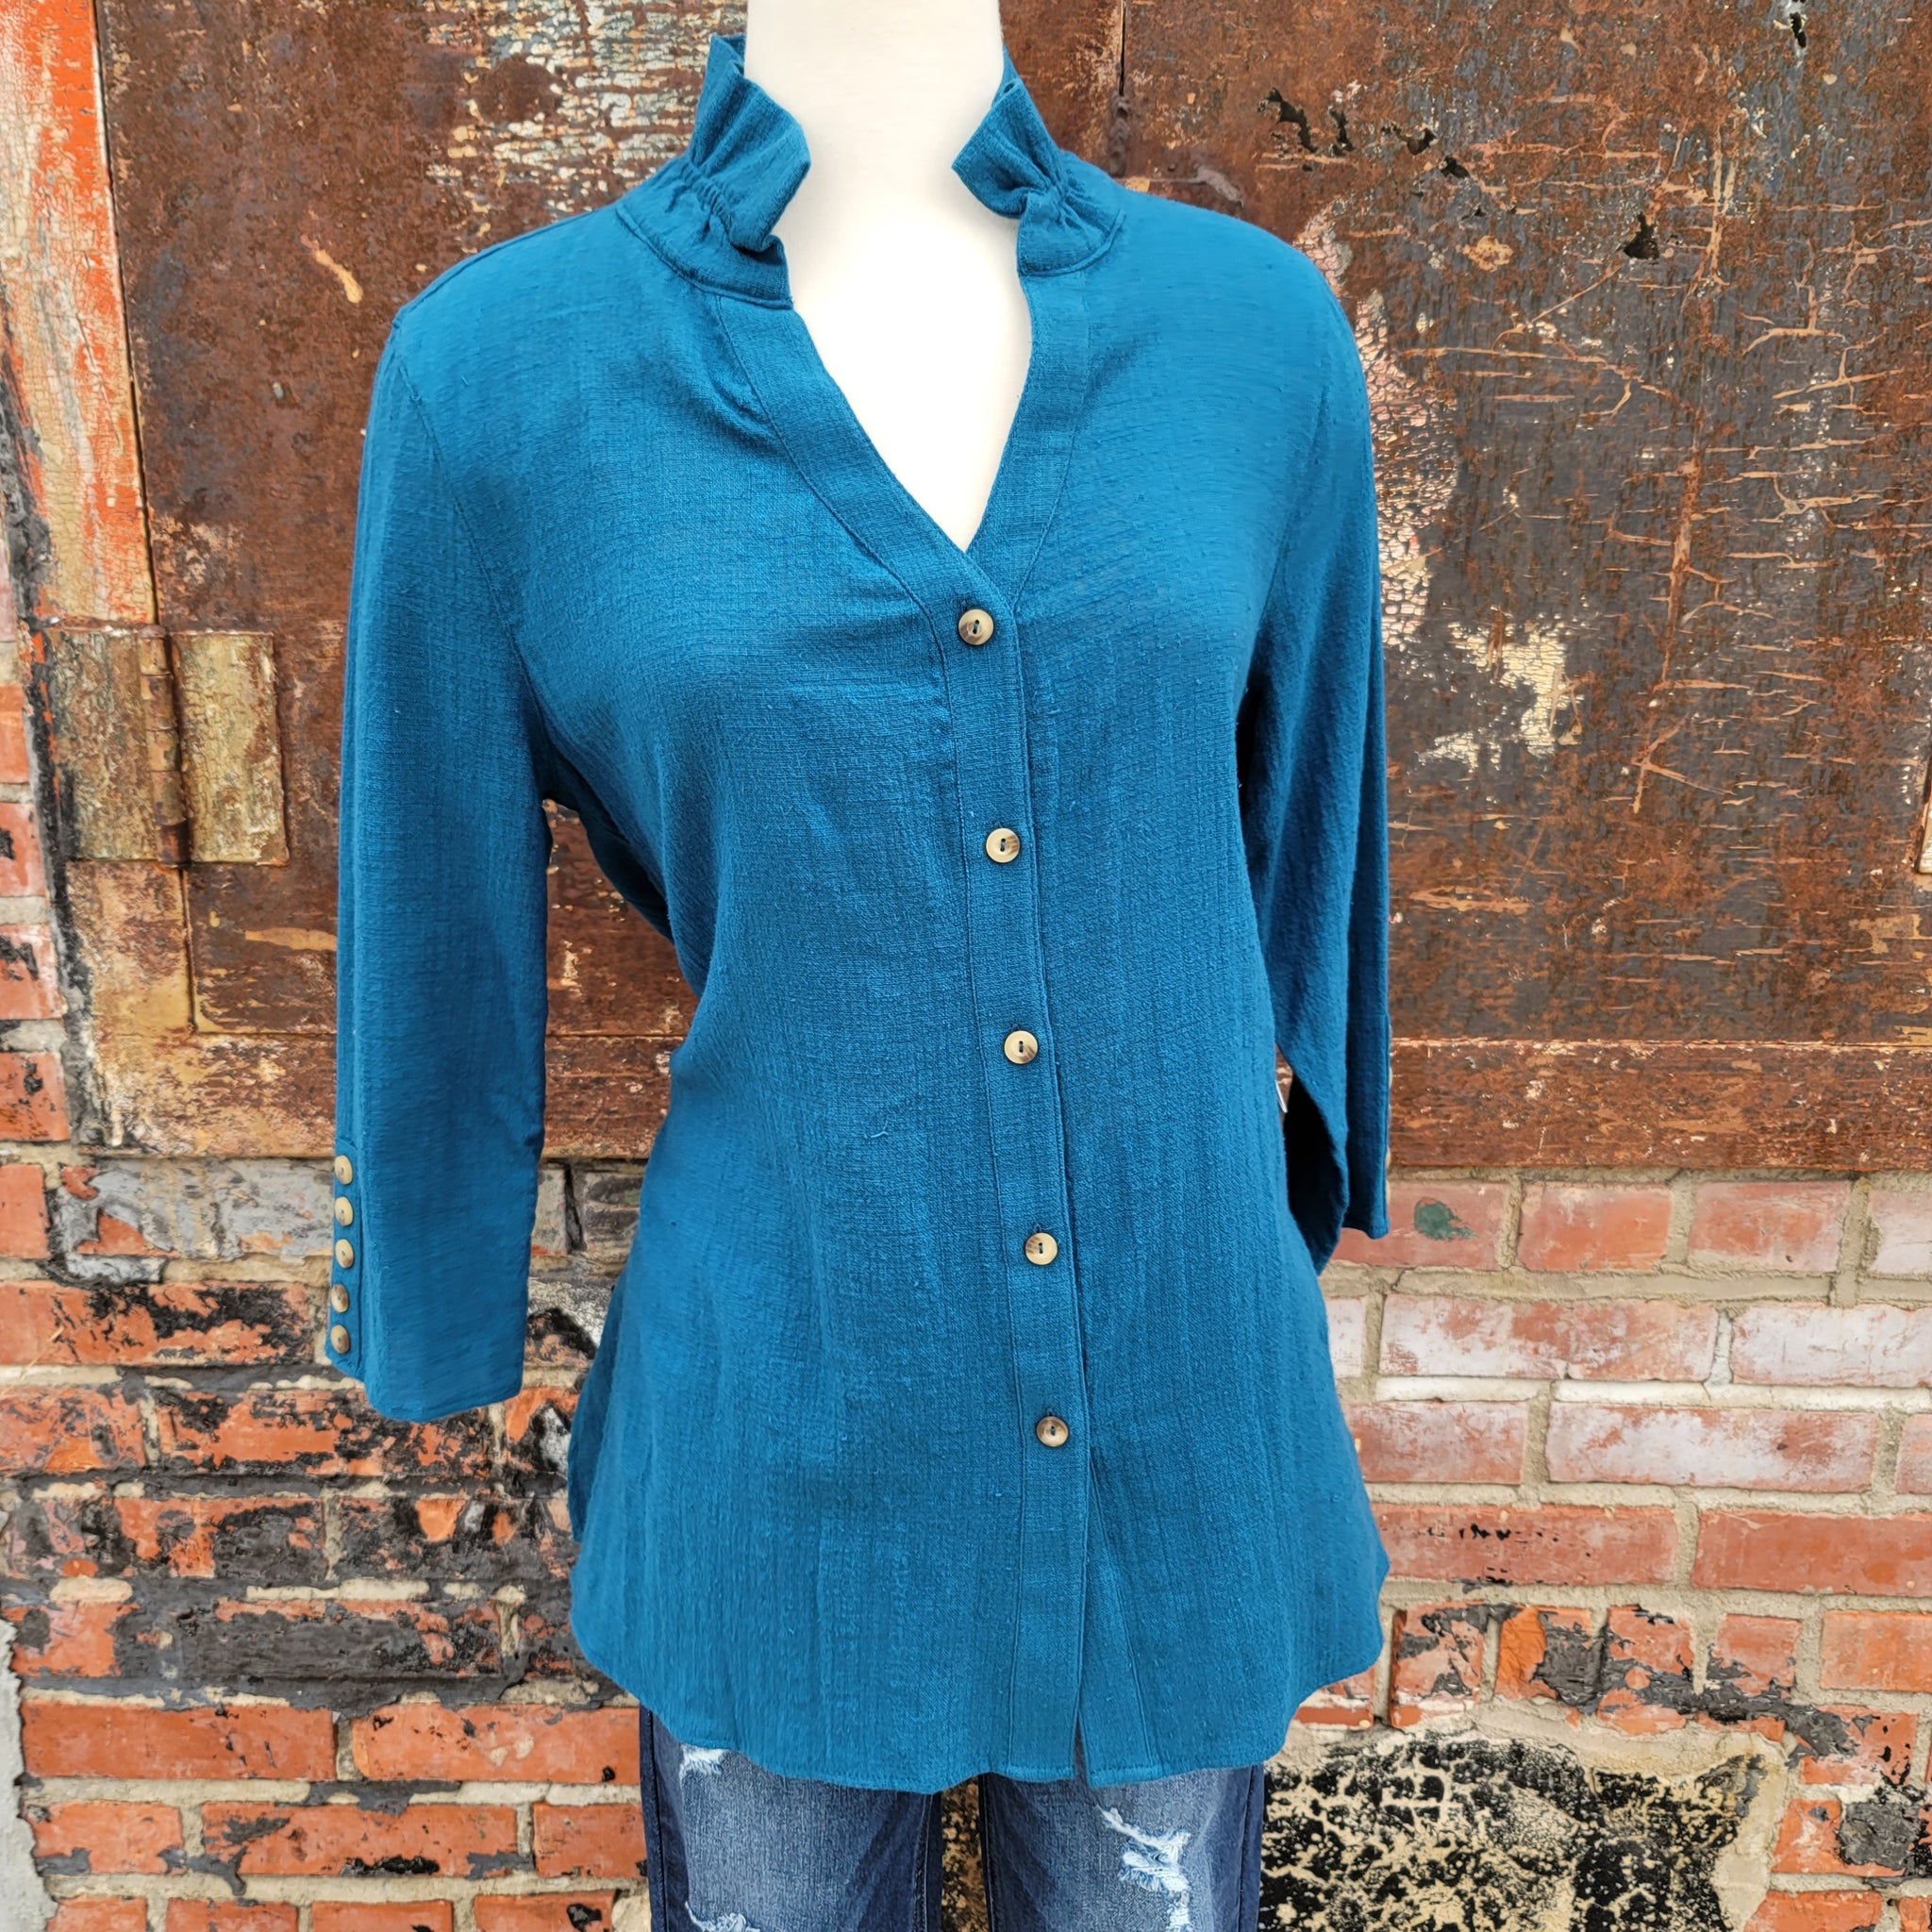 Multiples Y-Neck Turquoise Button Up Front Shirt